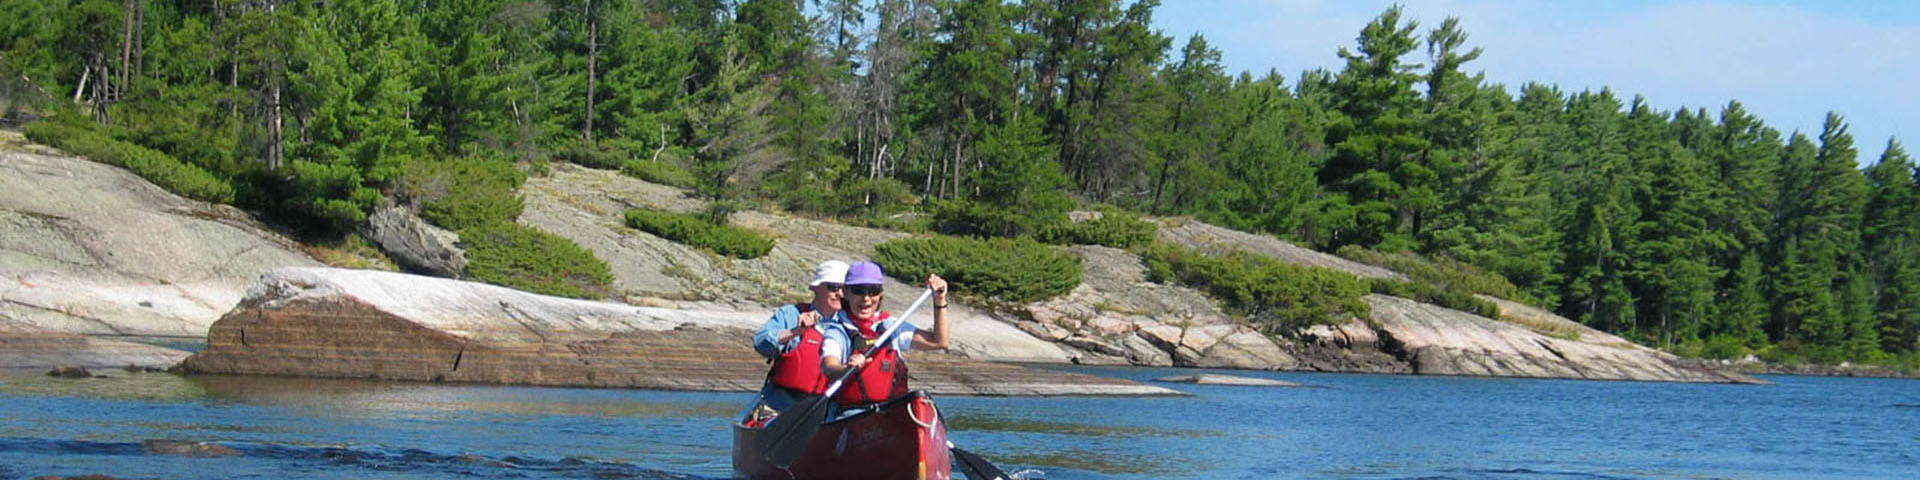 French River Canoe Trip for Women by Black Feather - Image 158